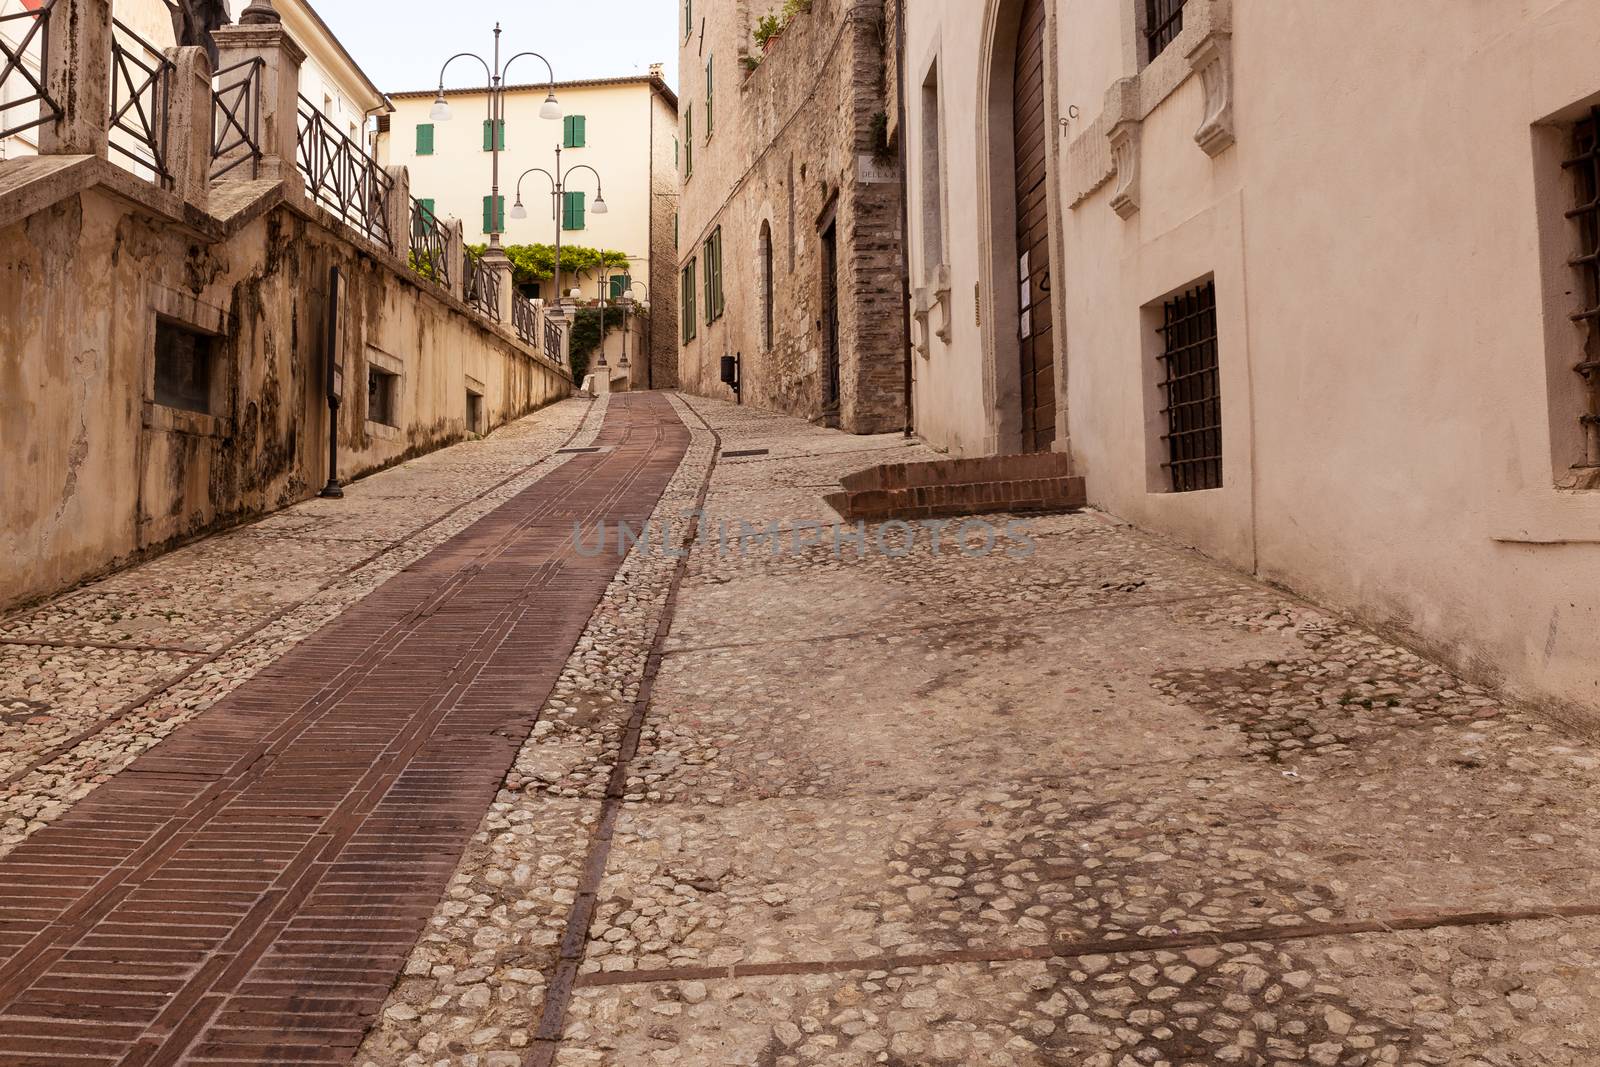 Streets and alleys in the wonderful town of Spoleto (Italy)